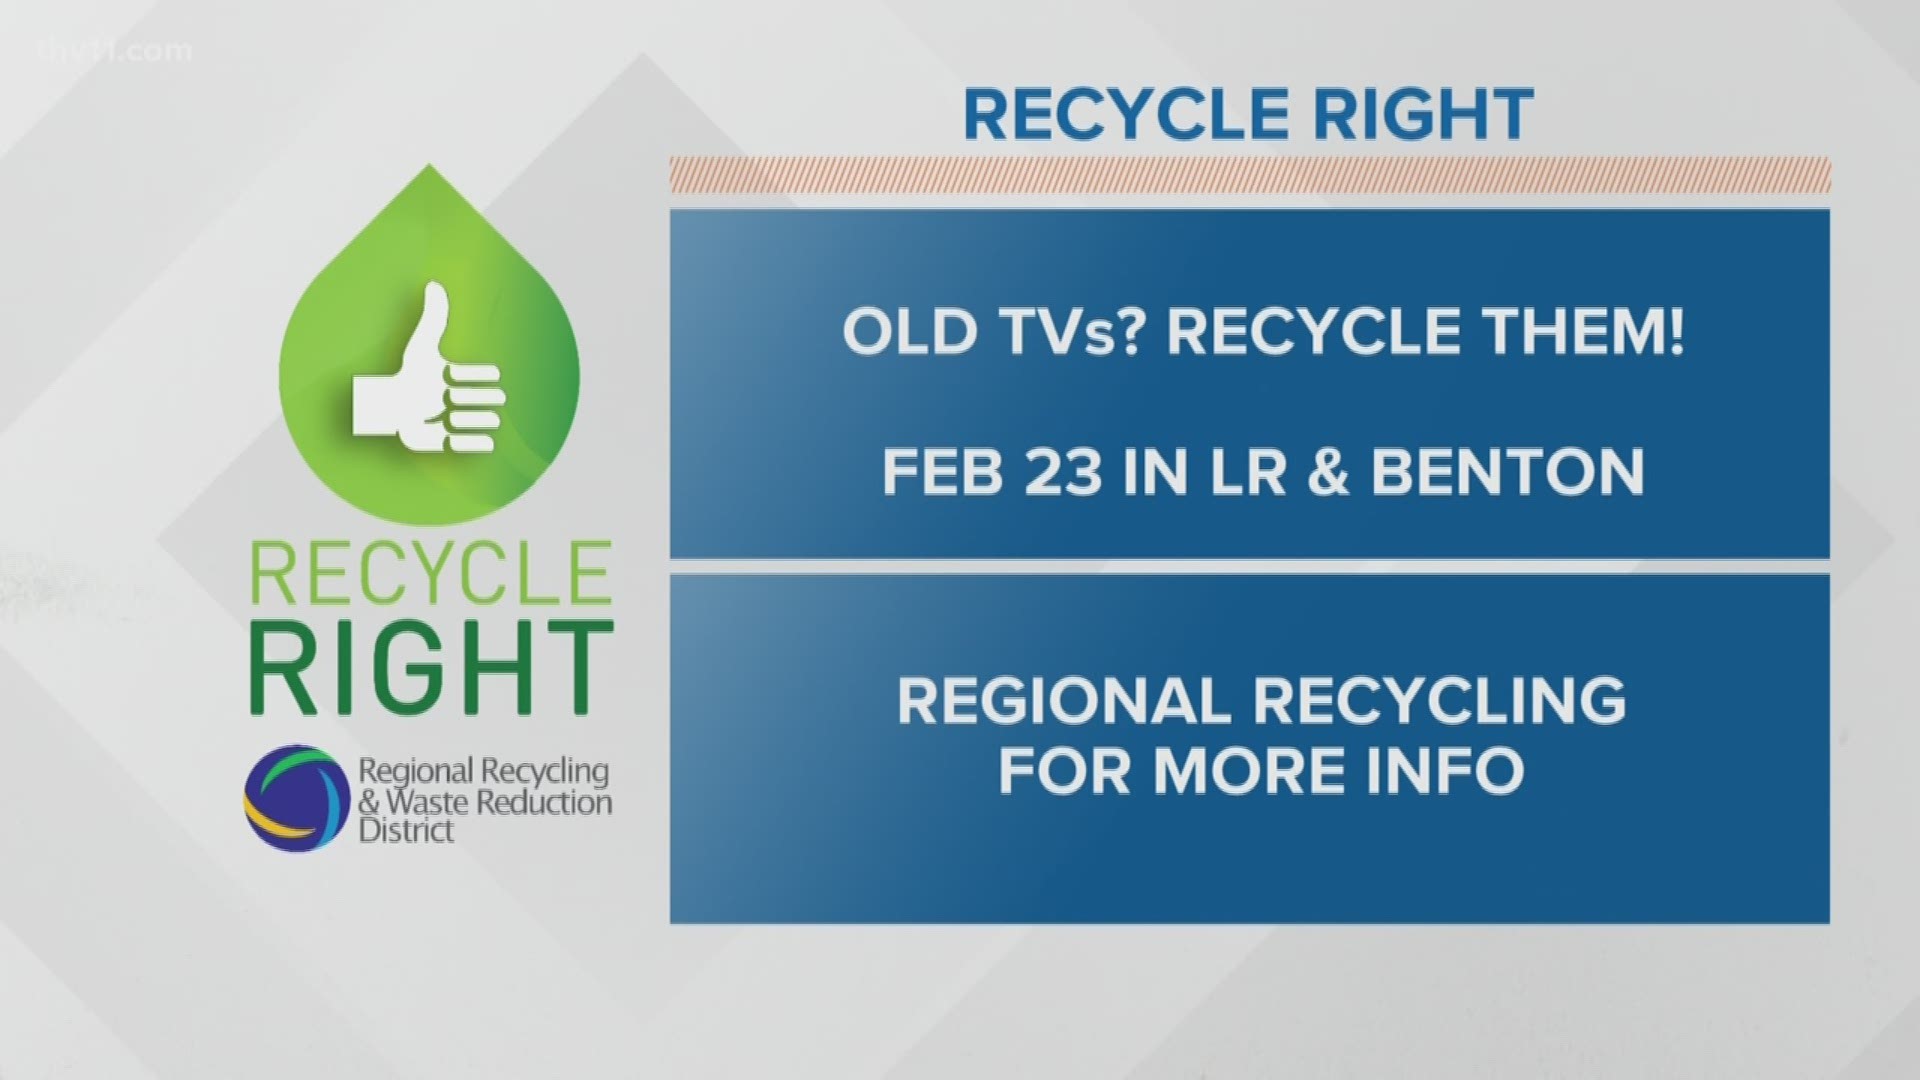 Recycle your old TVs!